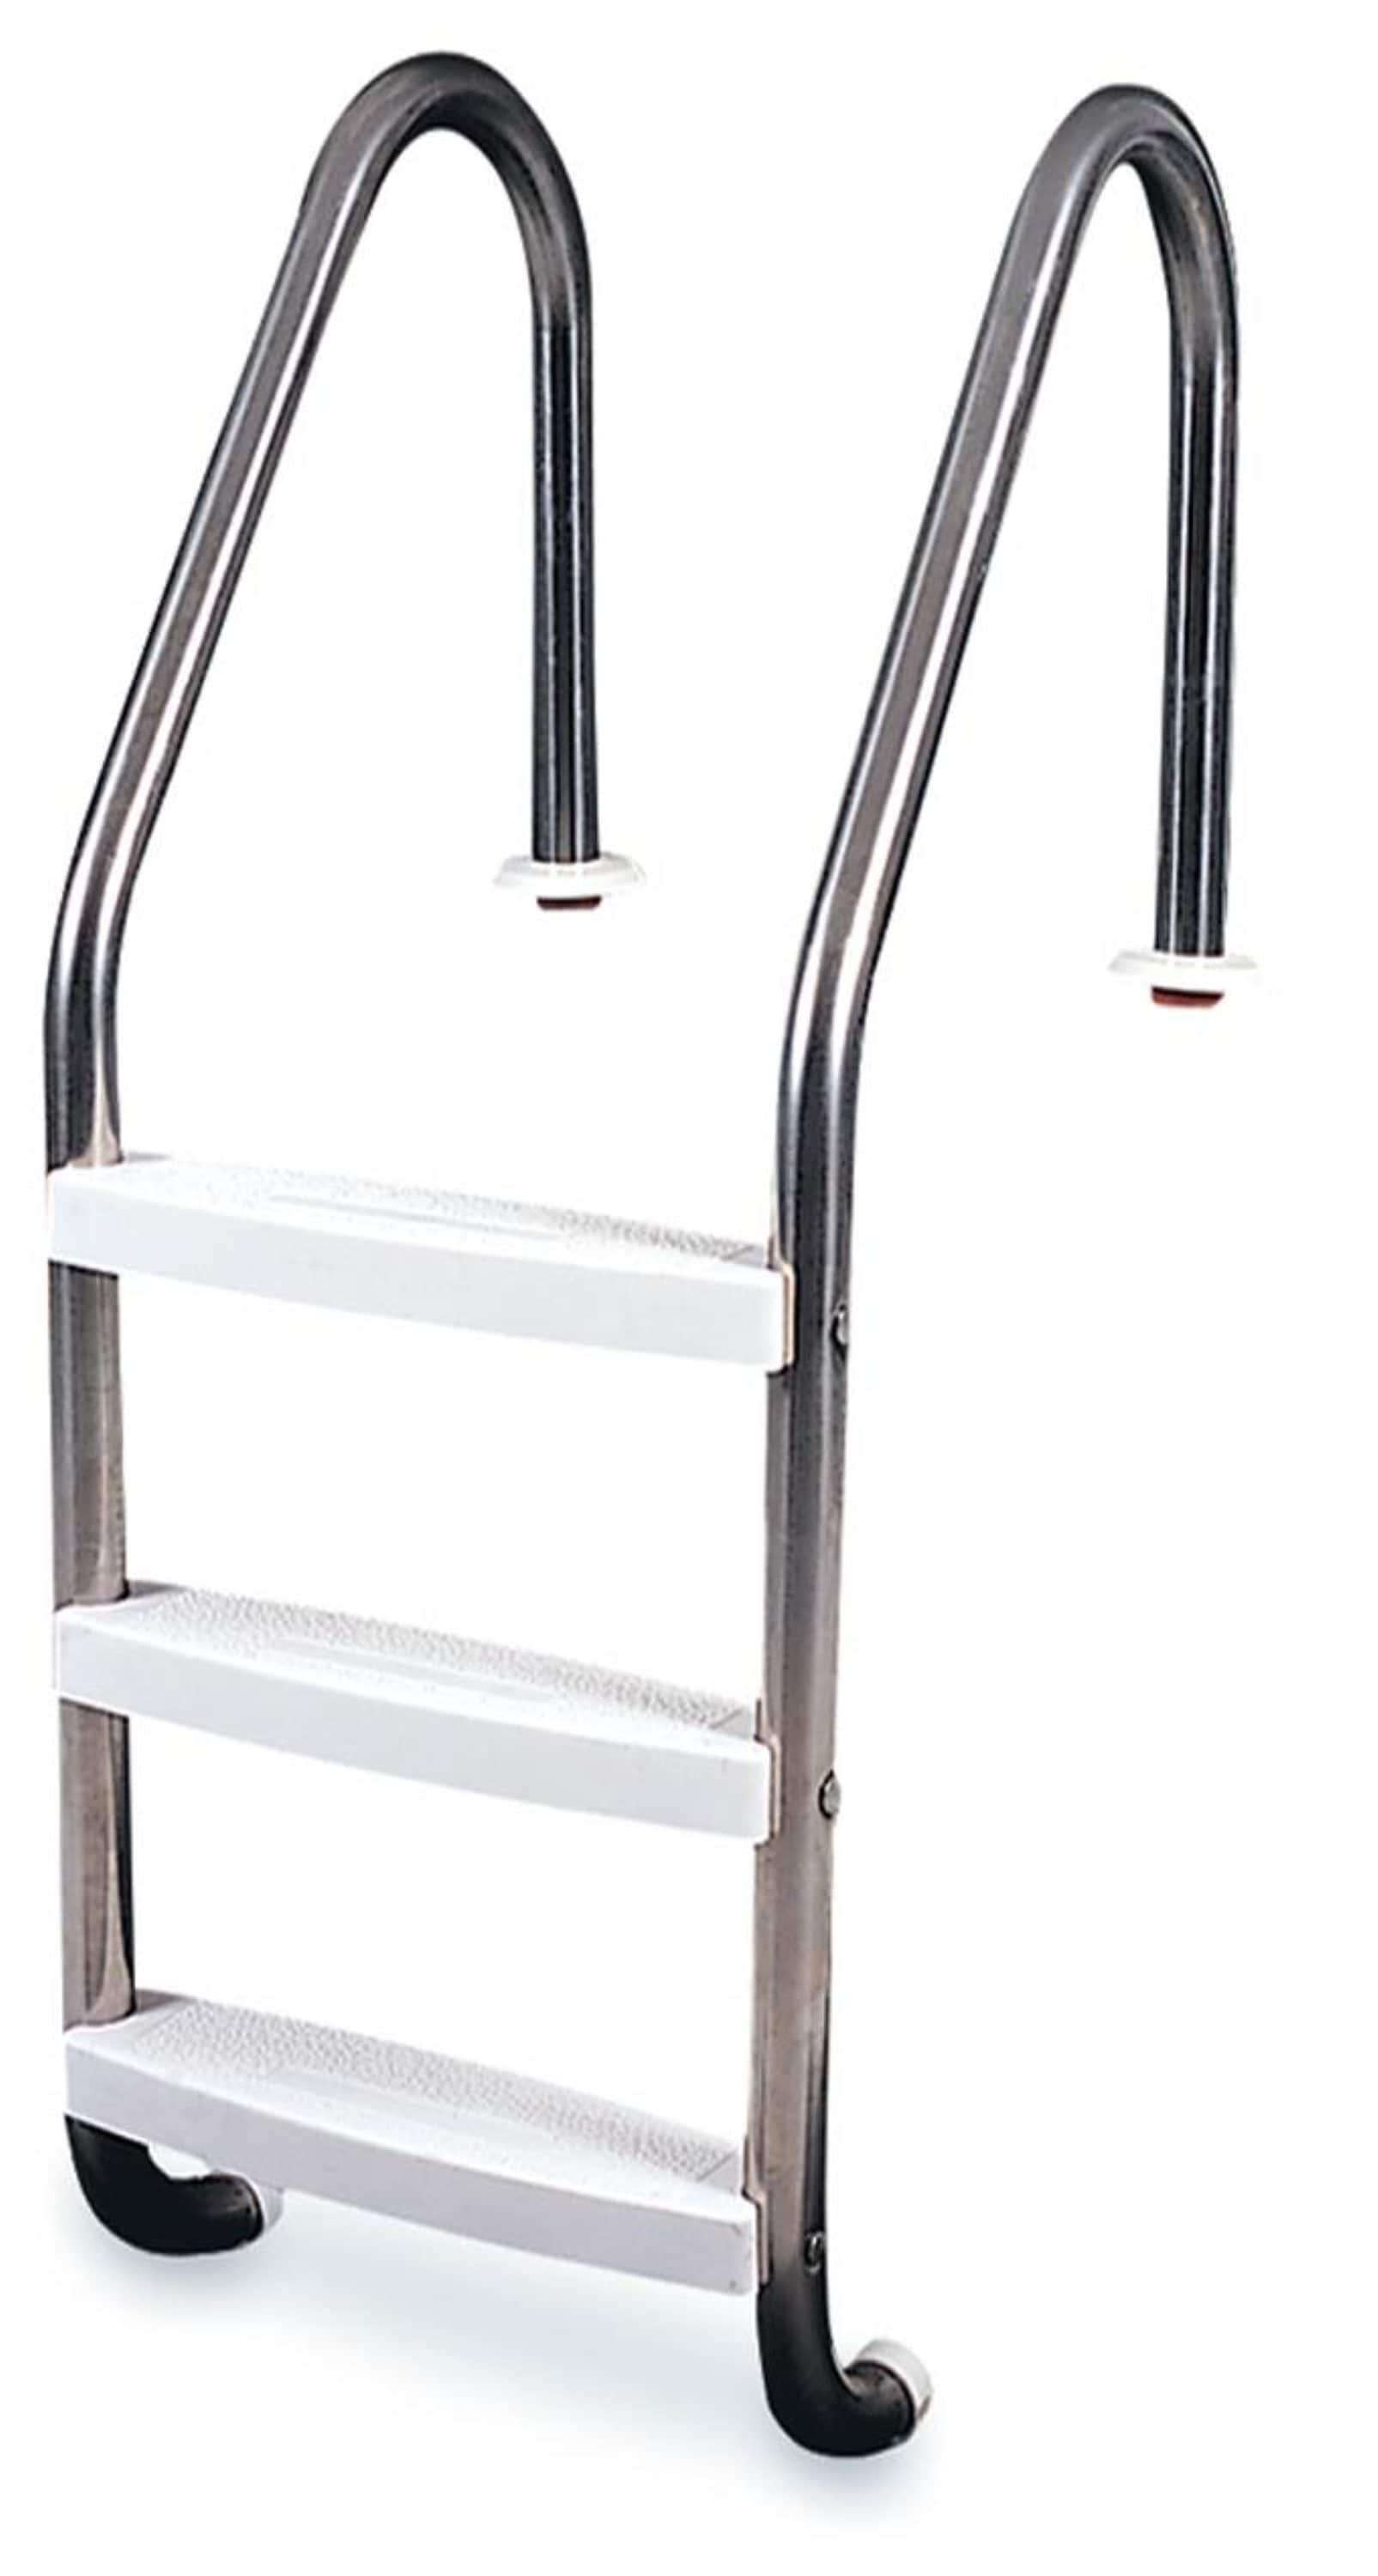 Swimline Stainless Steel In-Pool Deck Ladder For Aboveground Swiming Pool 87925